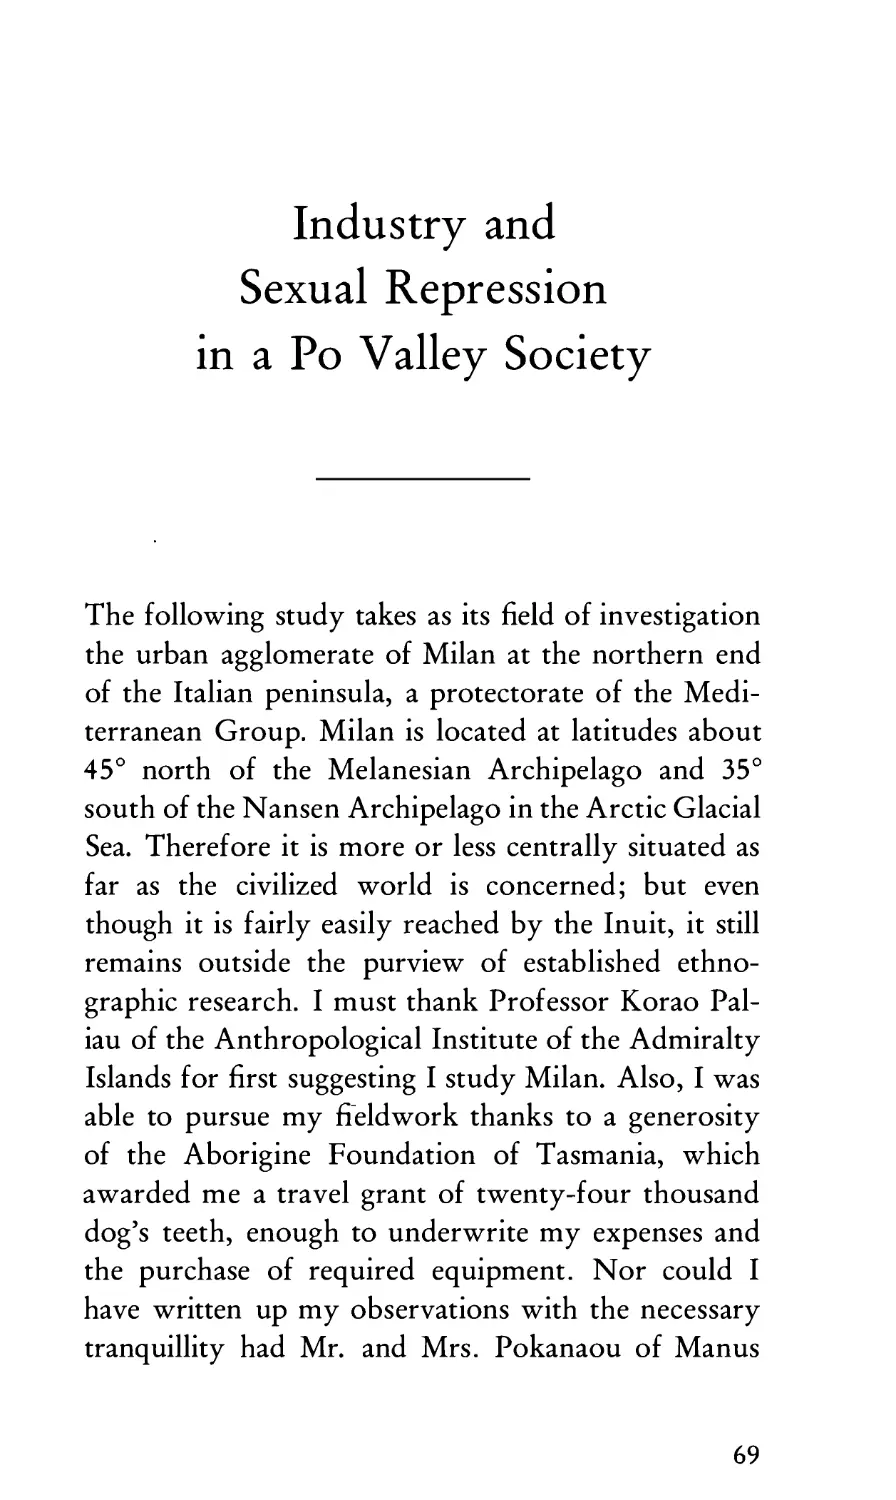 Industry and Sexual Repression in a Po Valley Society